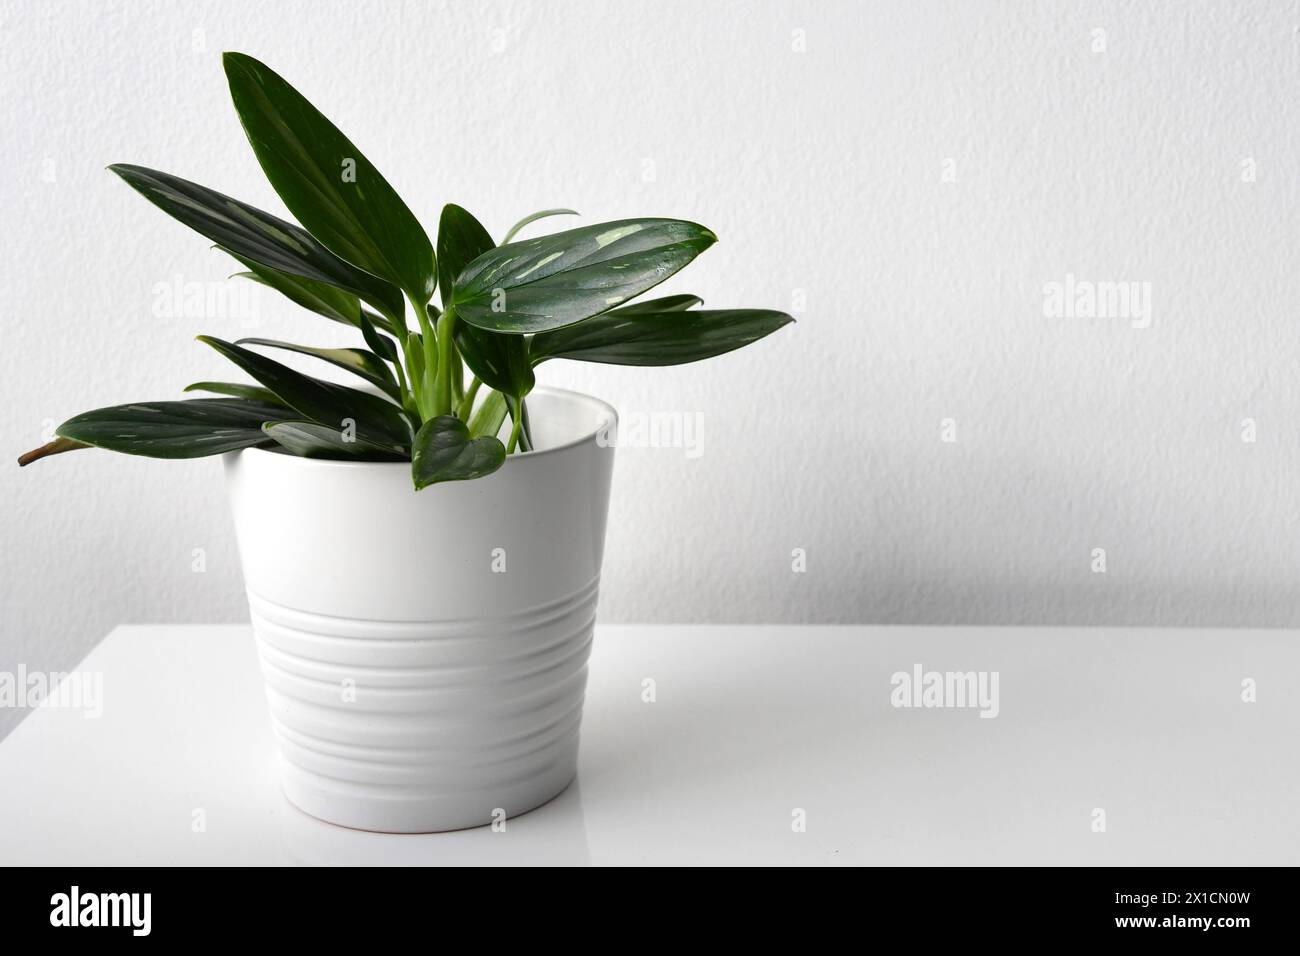 Vining philodendron, plant with green leaves and white variegation in a white pot. Isolated on a white background. Landscape orientation. Stock Photo